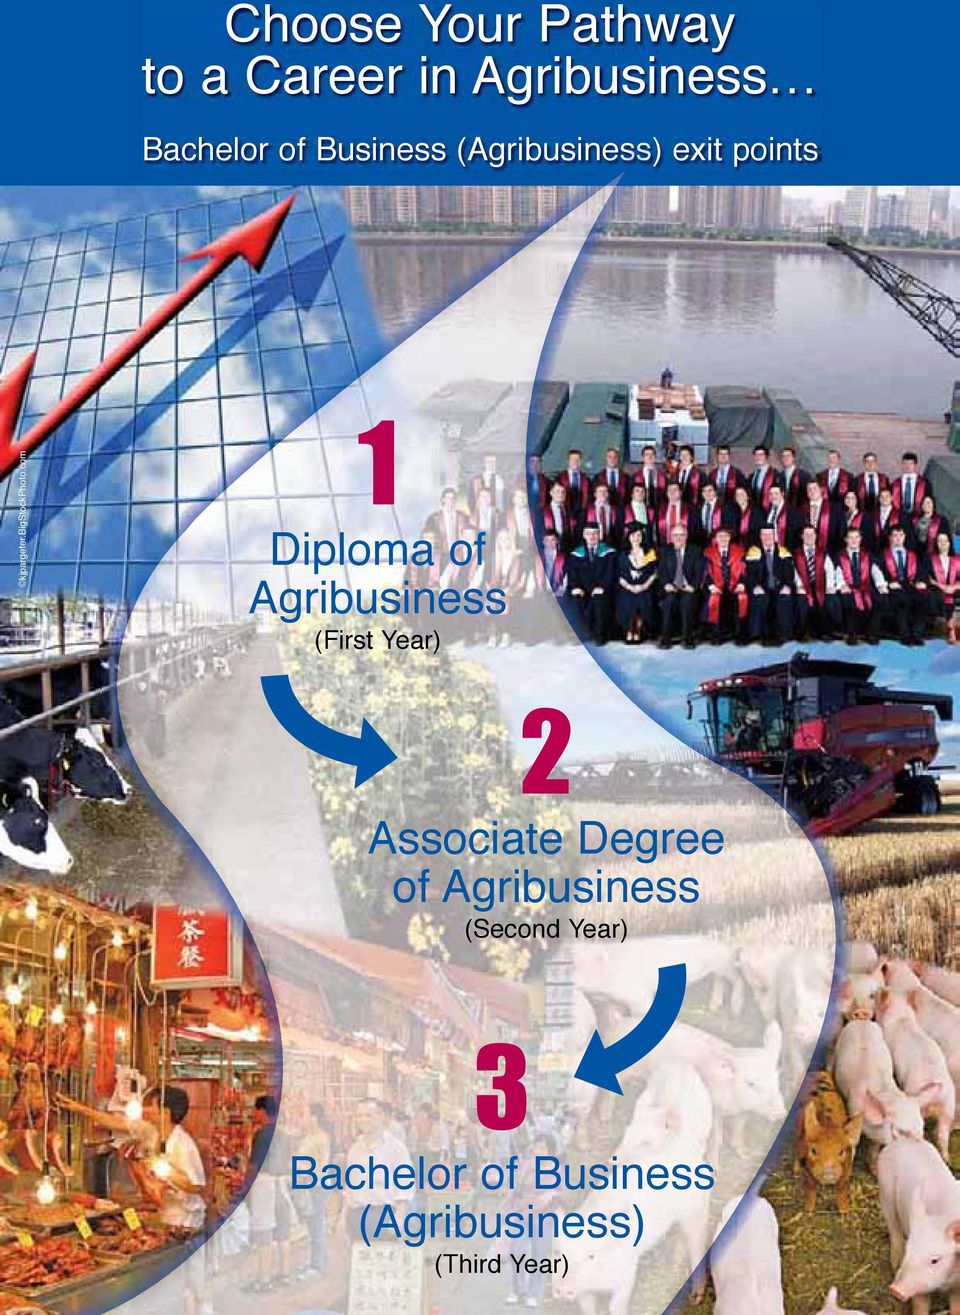 com 1 Diploma of Agribusiness (First Year) 2 Associate Degree of